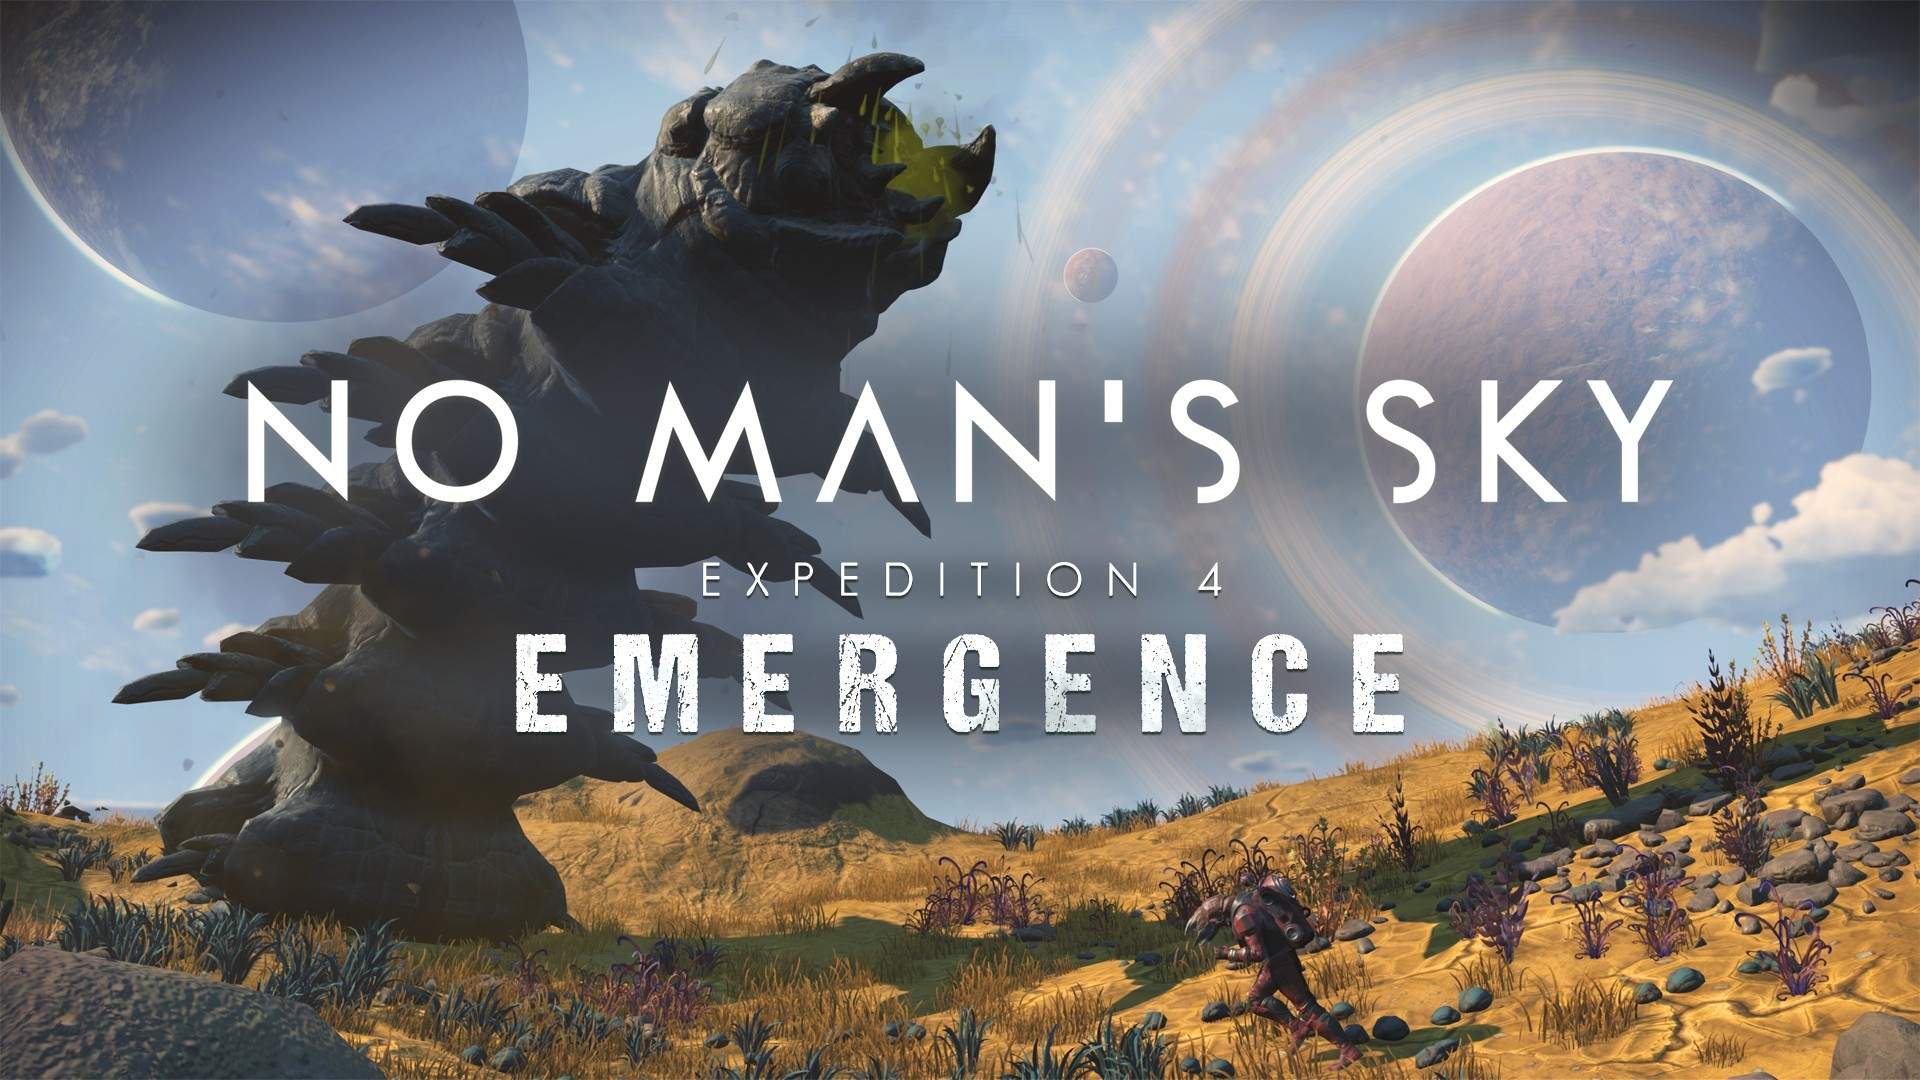 No Man's Sky Gets Dune-Themed Emergence Expedition Ahead of